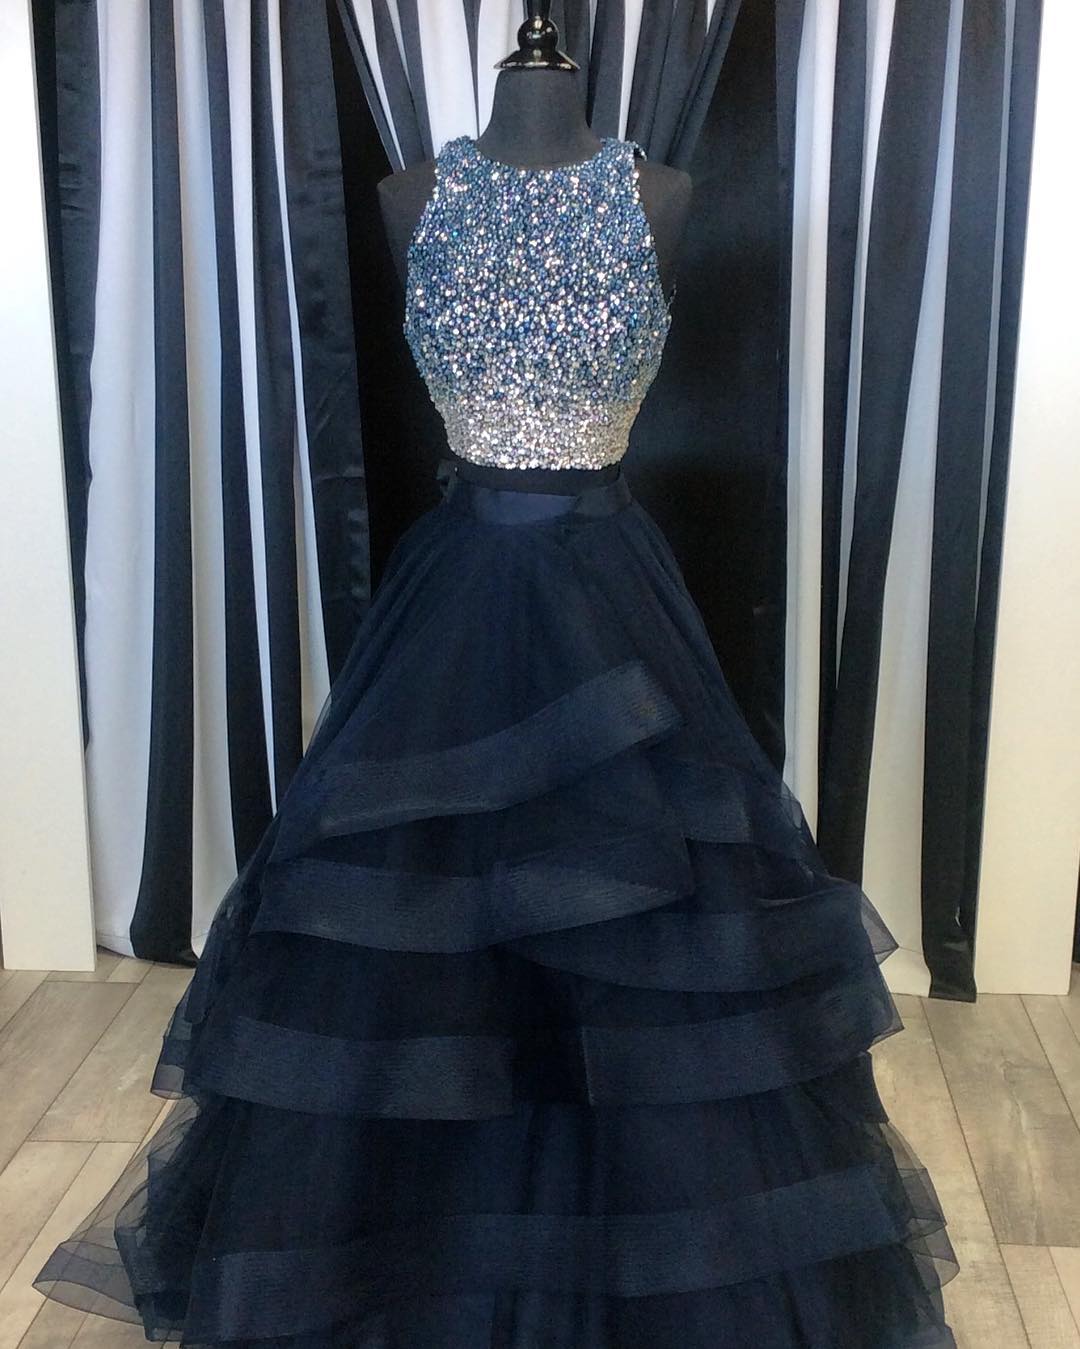 Prom Dresses,evening Dress,two Piece Prom Dresses,ruffles Ball Gowns,sparkly Sequins Dress,2 Piece Prom Dress,long Party Dress,prom Dresses